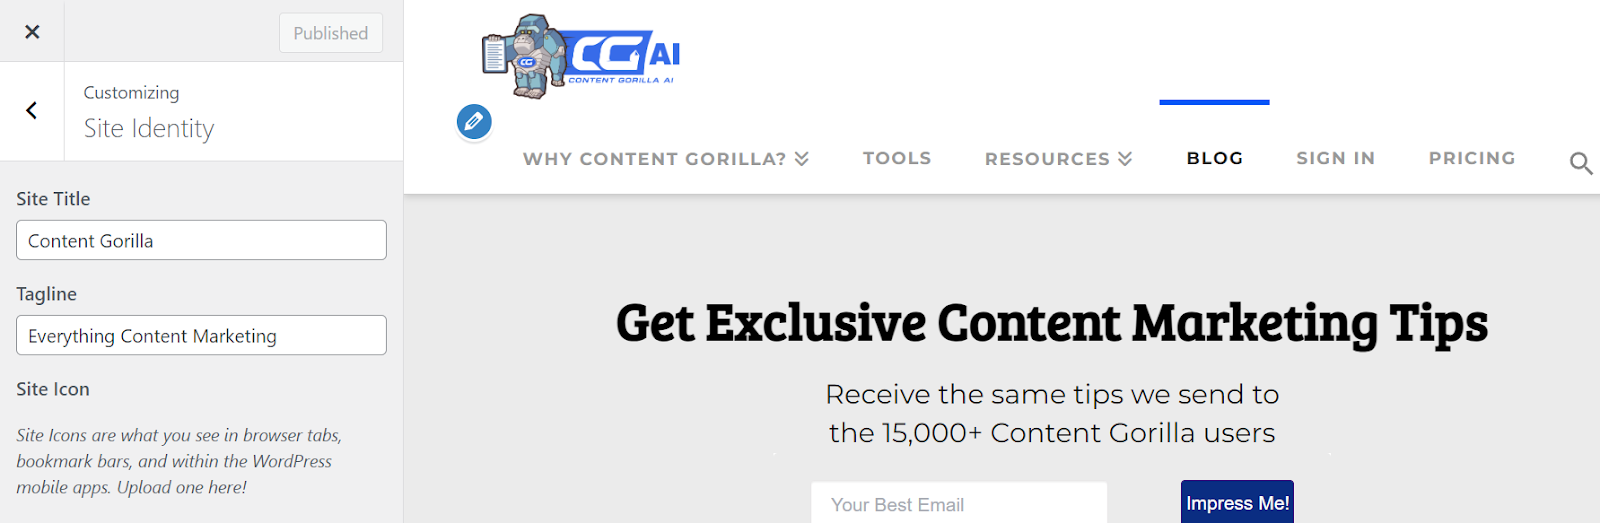 Image Showing Site Title for Content Gorilla's WordPress Website